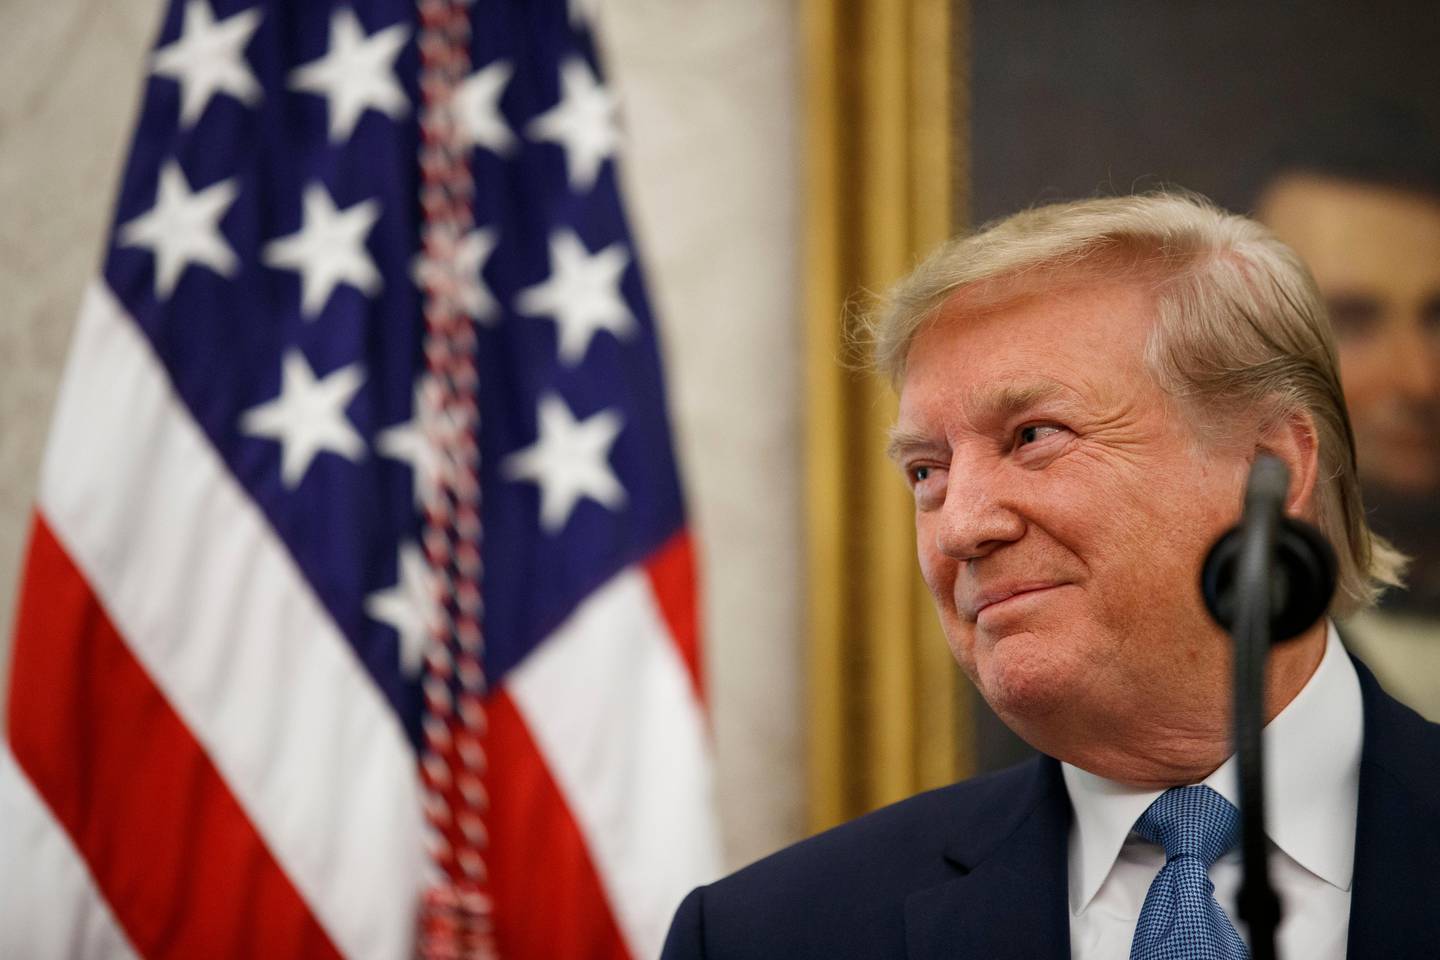 President Donald Trump smiles while speaking during a Presidential Medal of Freedom ceremony for former NBA basketball player and coach Bob Cousy, of the Boston Celtics, in the Oval Office of the White House, Thursday, Aug. 22, 2019, in Washington. (AP Photo/Alex Brandon)